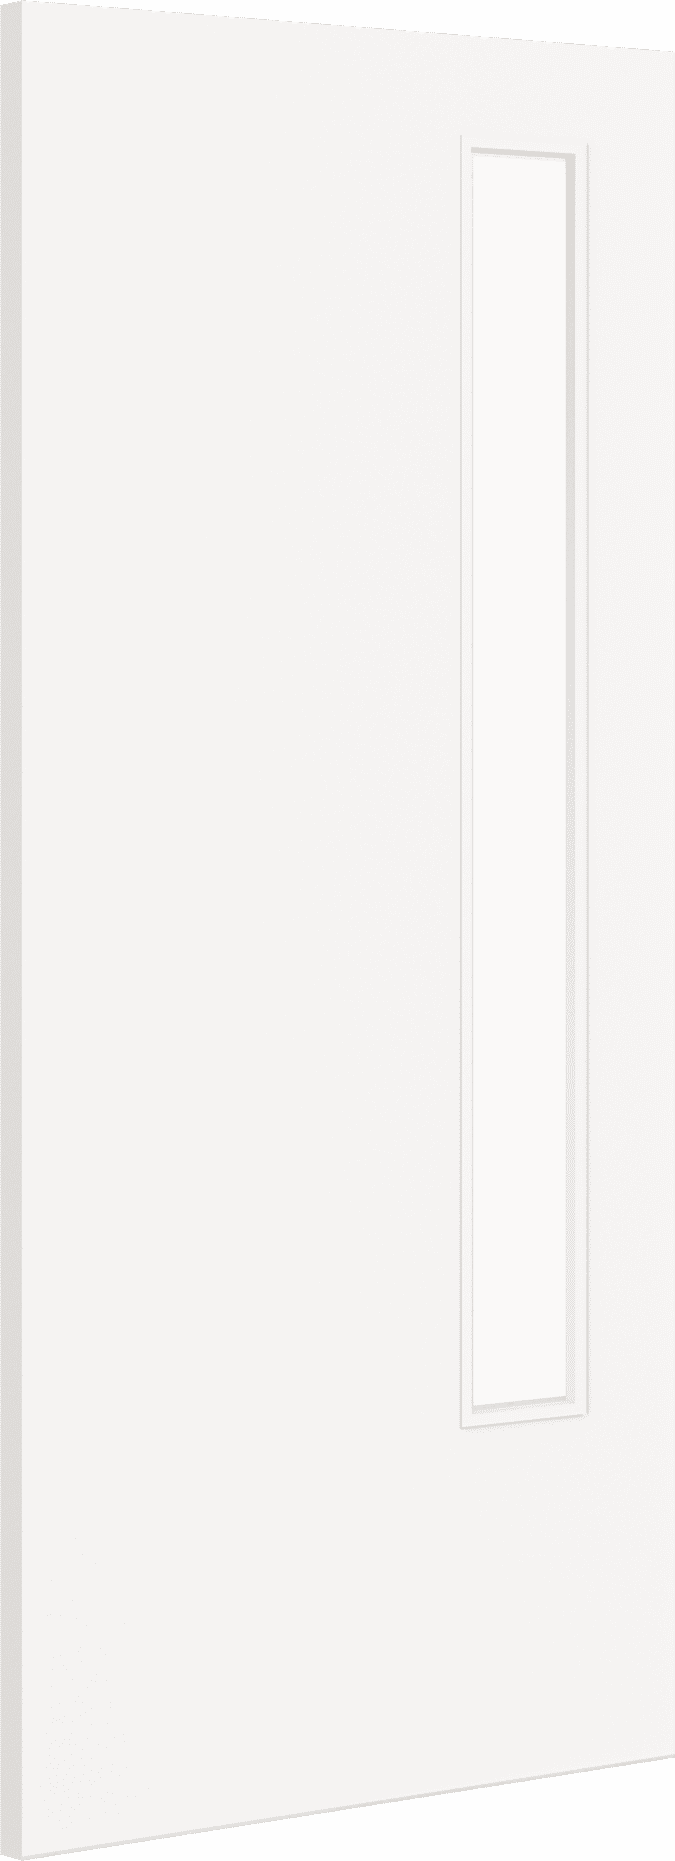 2040mm x 926mm x 44mm Architectural Paint Grade White 13 Frosted Glazed Fire Door Blank